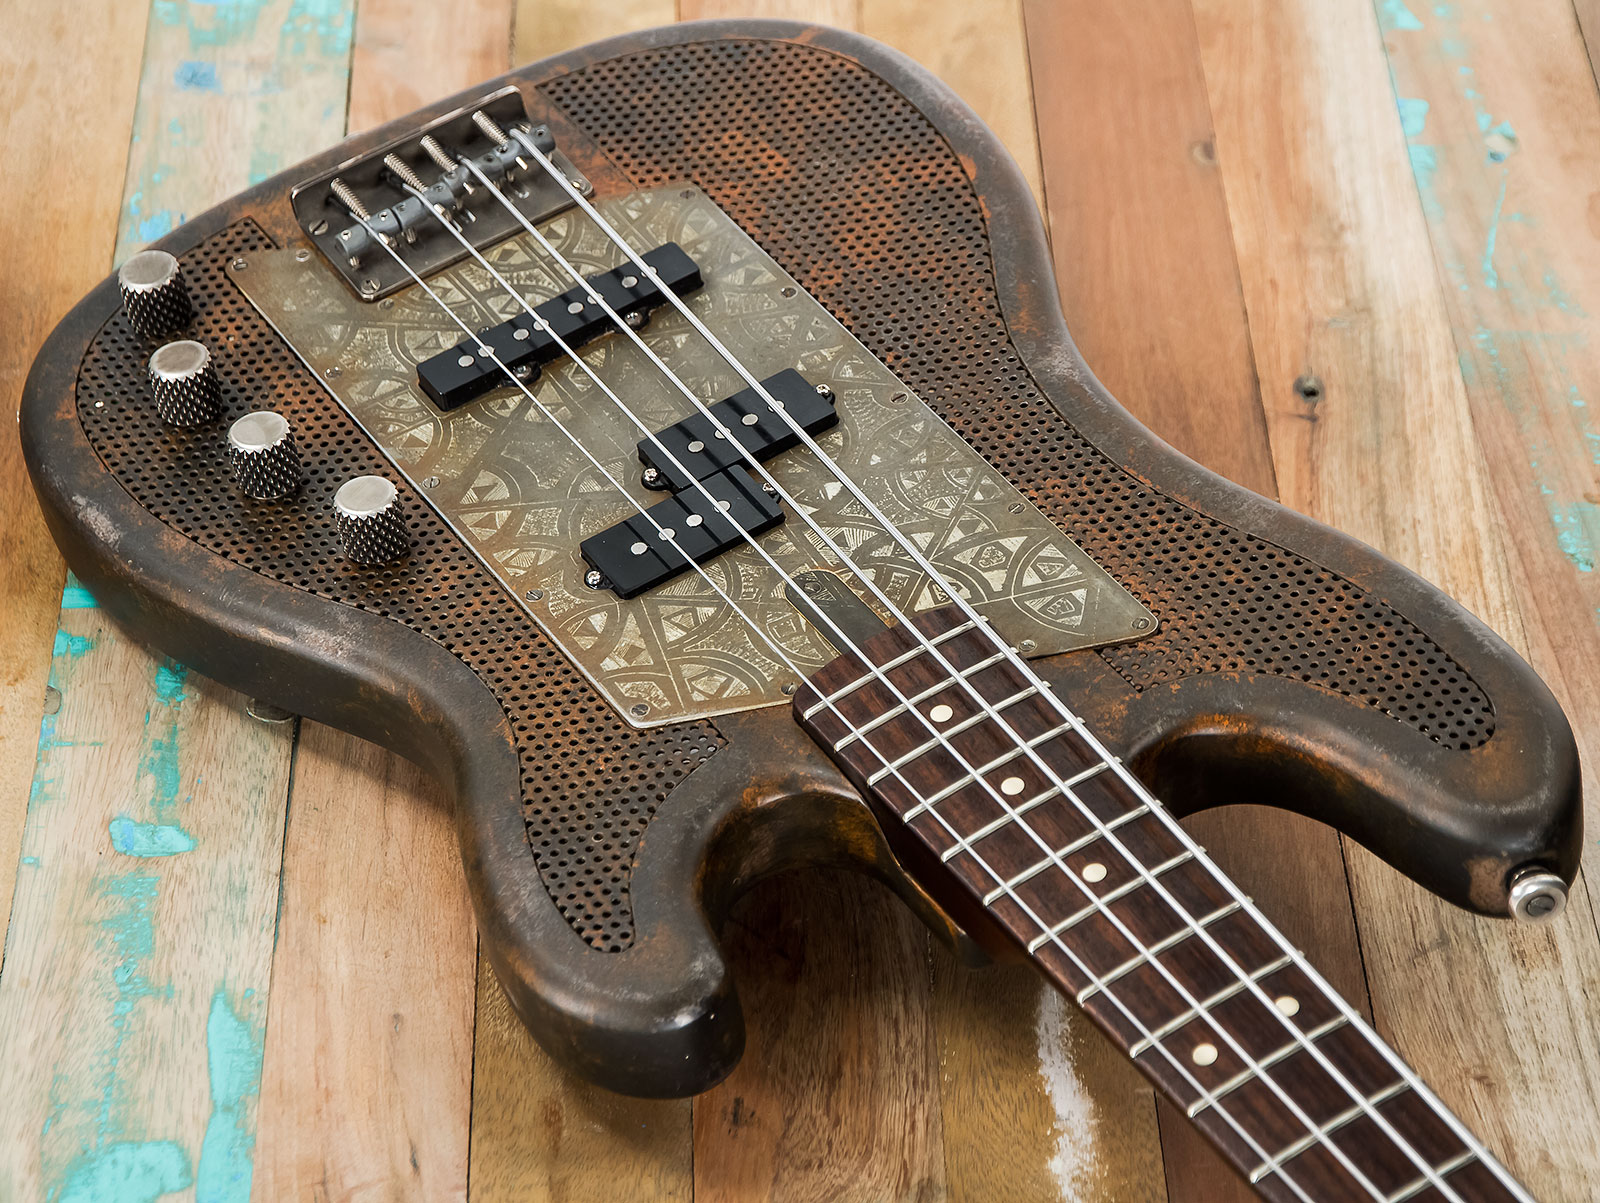 James Trussart Steelcaster Bass Perforated Active Pf #19045 - Rust O Matic African Engraved - Solidbody E-bass - Variation 2